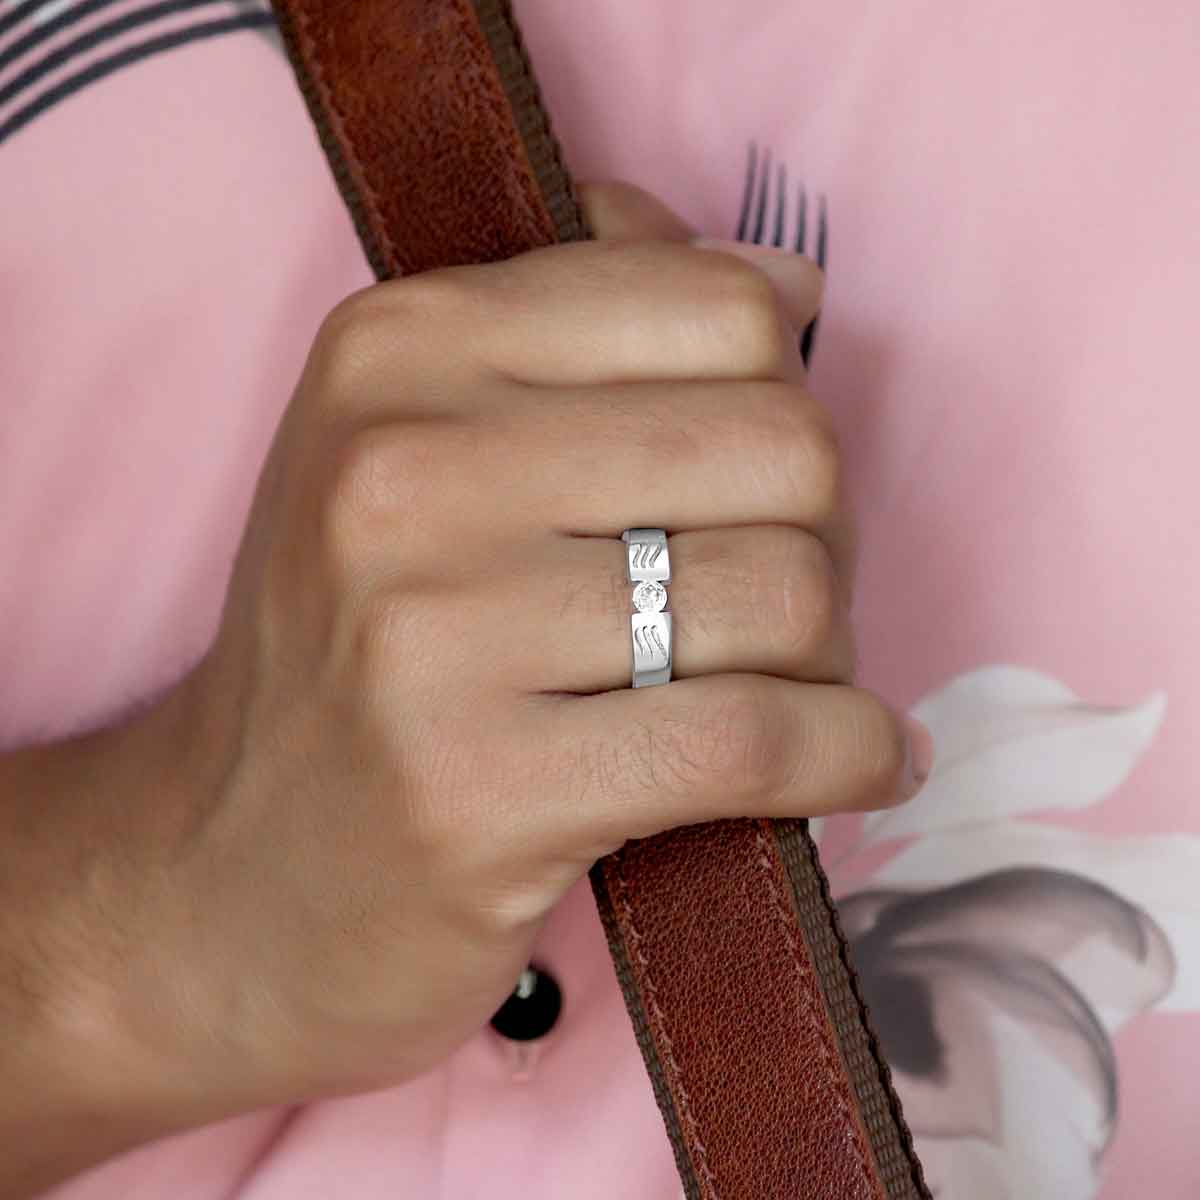 This sterling silver band features a unique wave design engraved with sparkling round zirconia, making it a stylish and versatile accessory for everyday wear. Crafted with a rhodium finish, it is a thoughtful gift option for men.